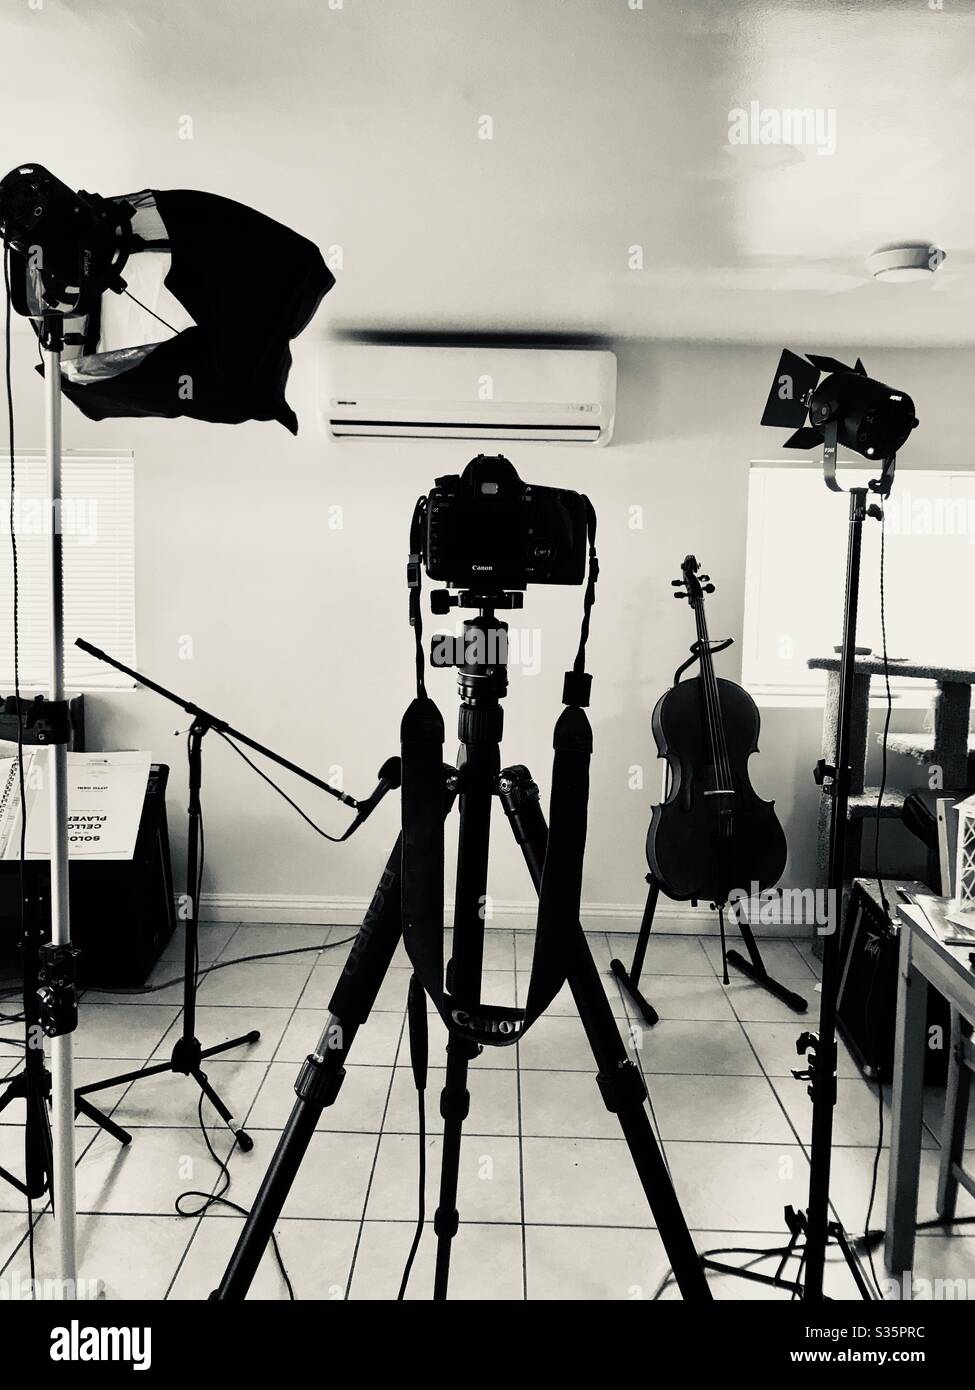 Self tape home studio with lighting, a DSLR and a cello, black and white photo. Stock Photo